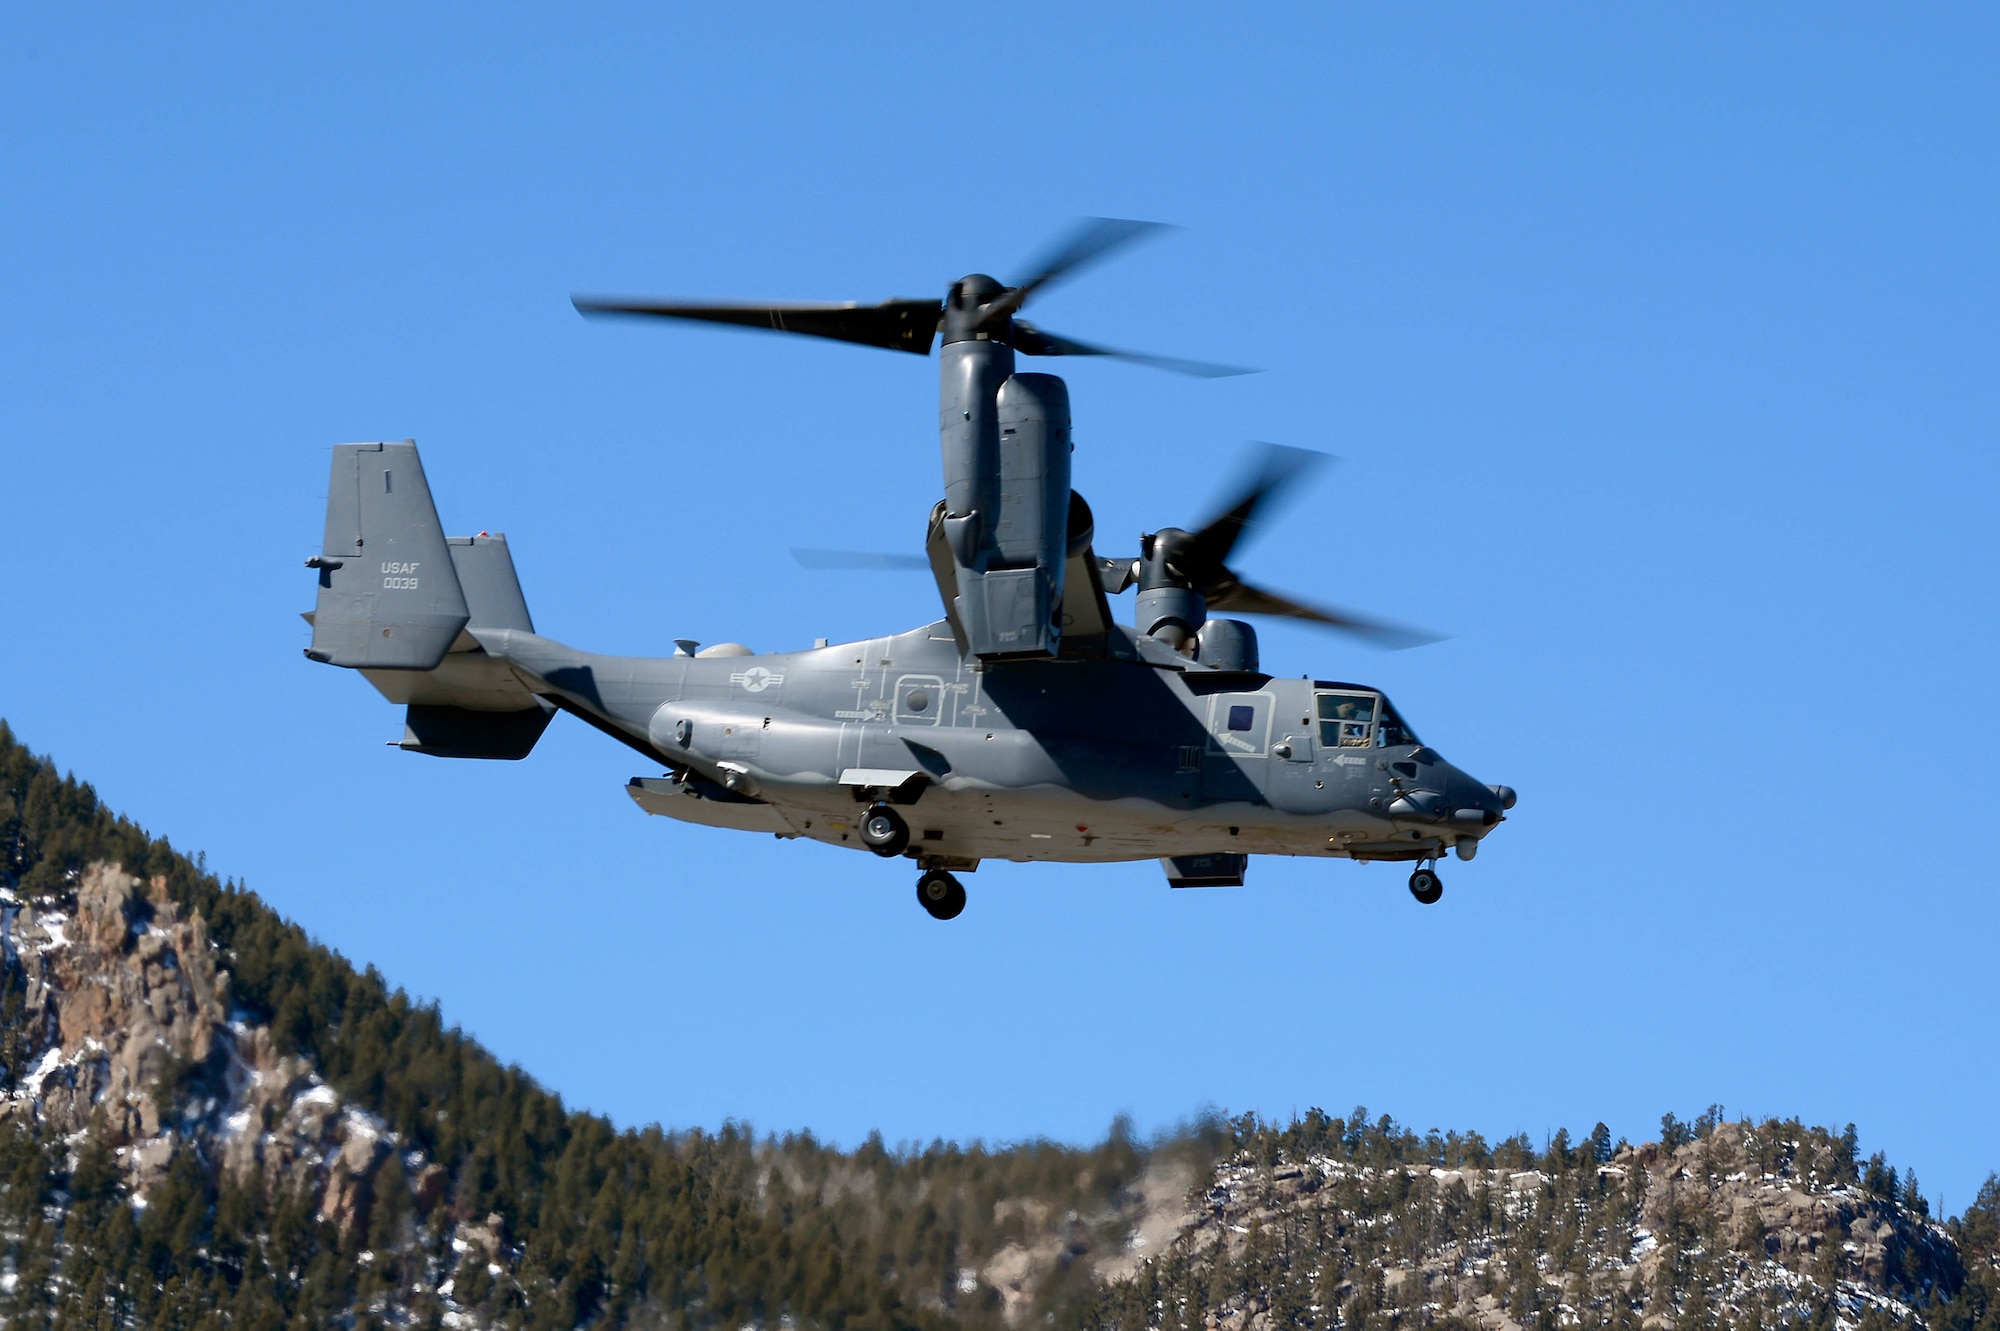 U.S. Air Force Academy - - A CV-22 Osprey flies over the terrazzo on March 20, 2019 during a demonstration to showcase the aircraft.  The Osprey landed on the terrazzo and cadets were able to speak with the crew and tour the aircraft. (U.S. Air Force photo/Darcie L. Ibidapo)